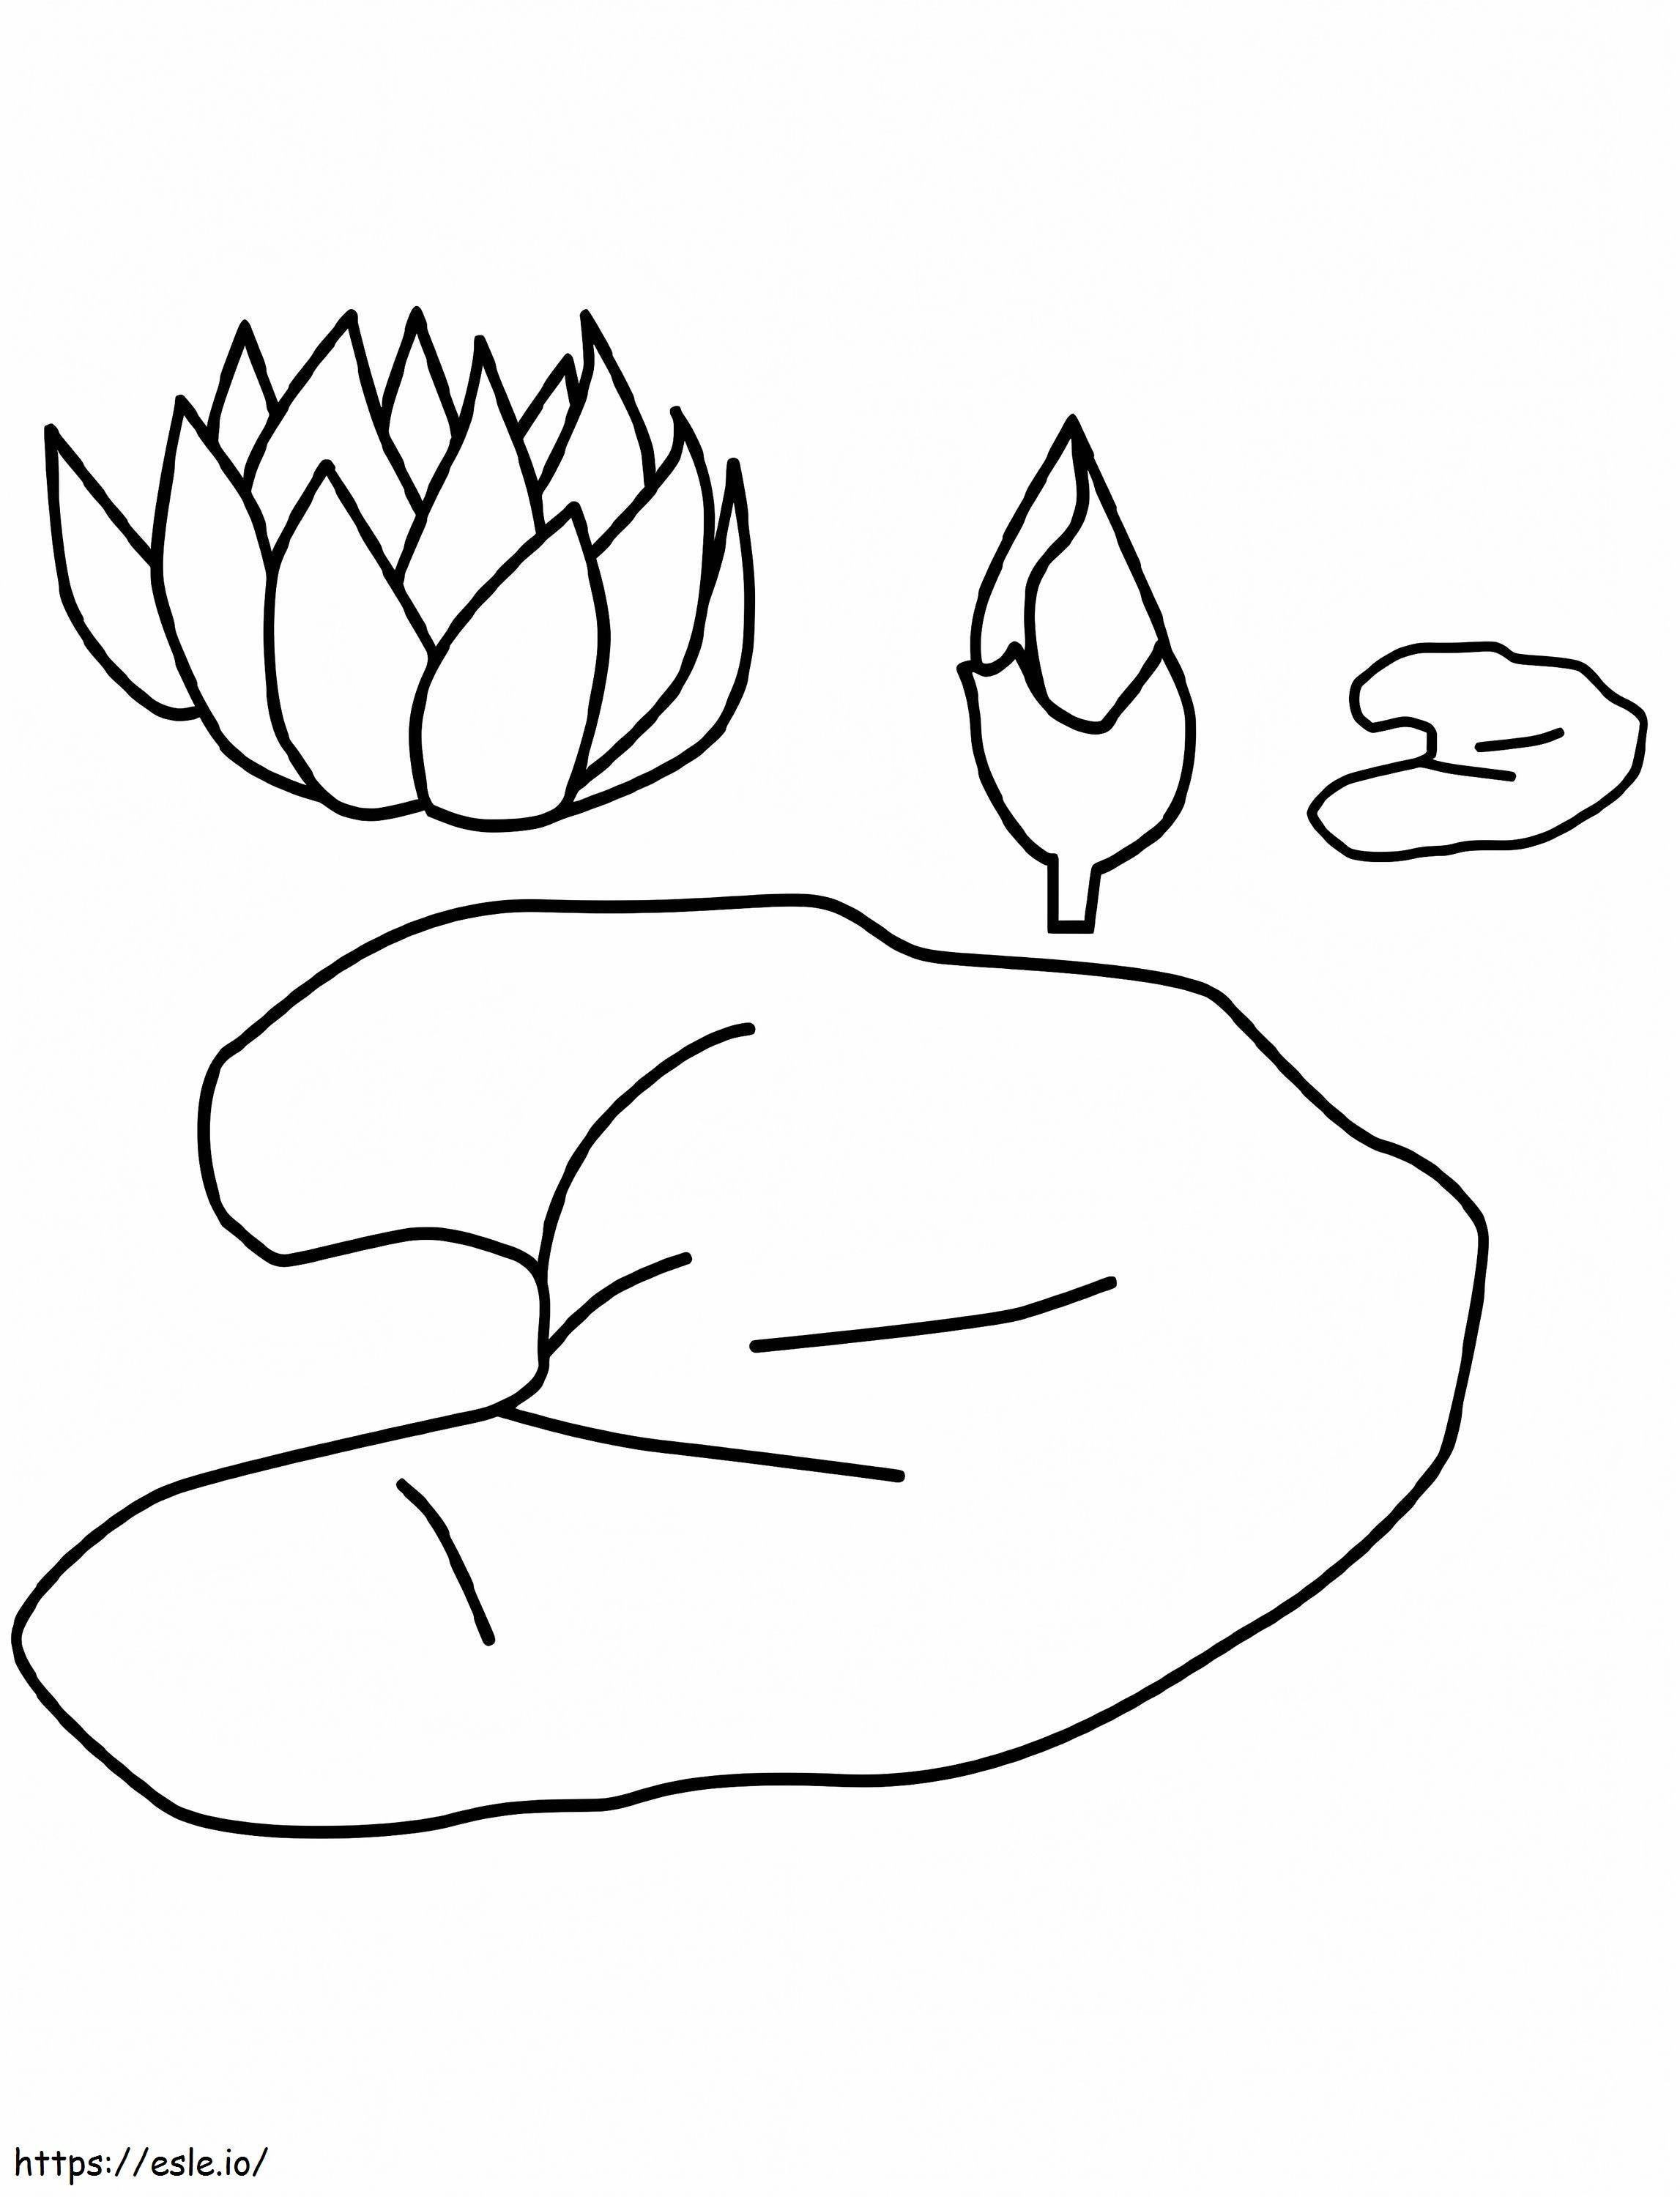 Water Lily Flower 5 coloring page